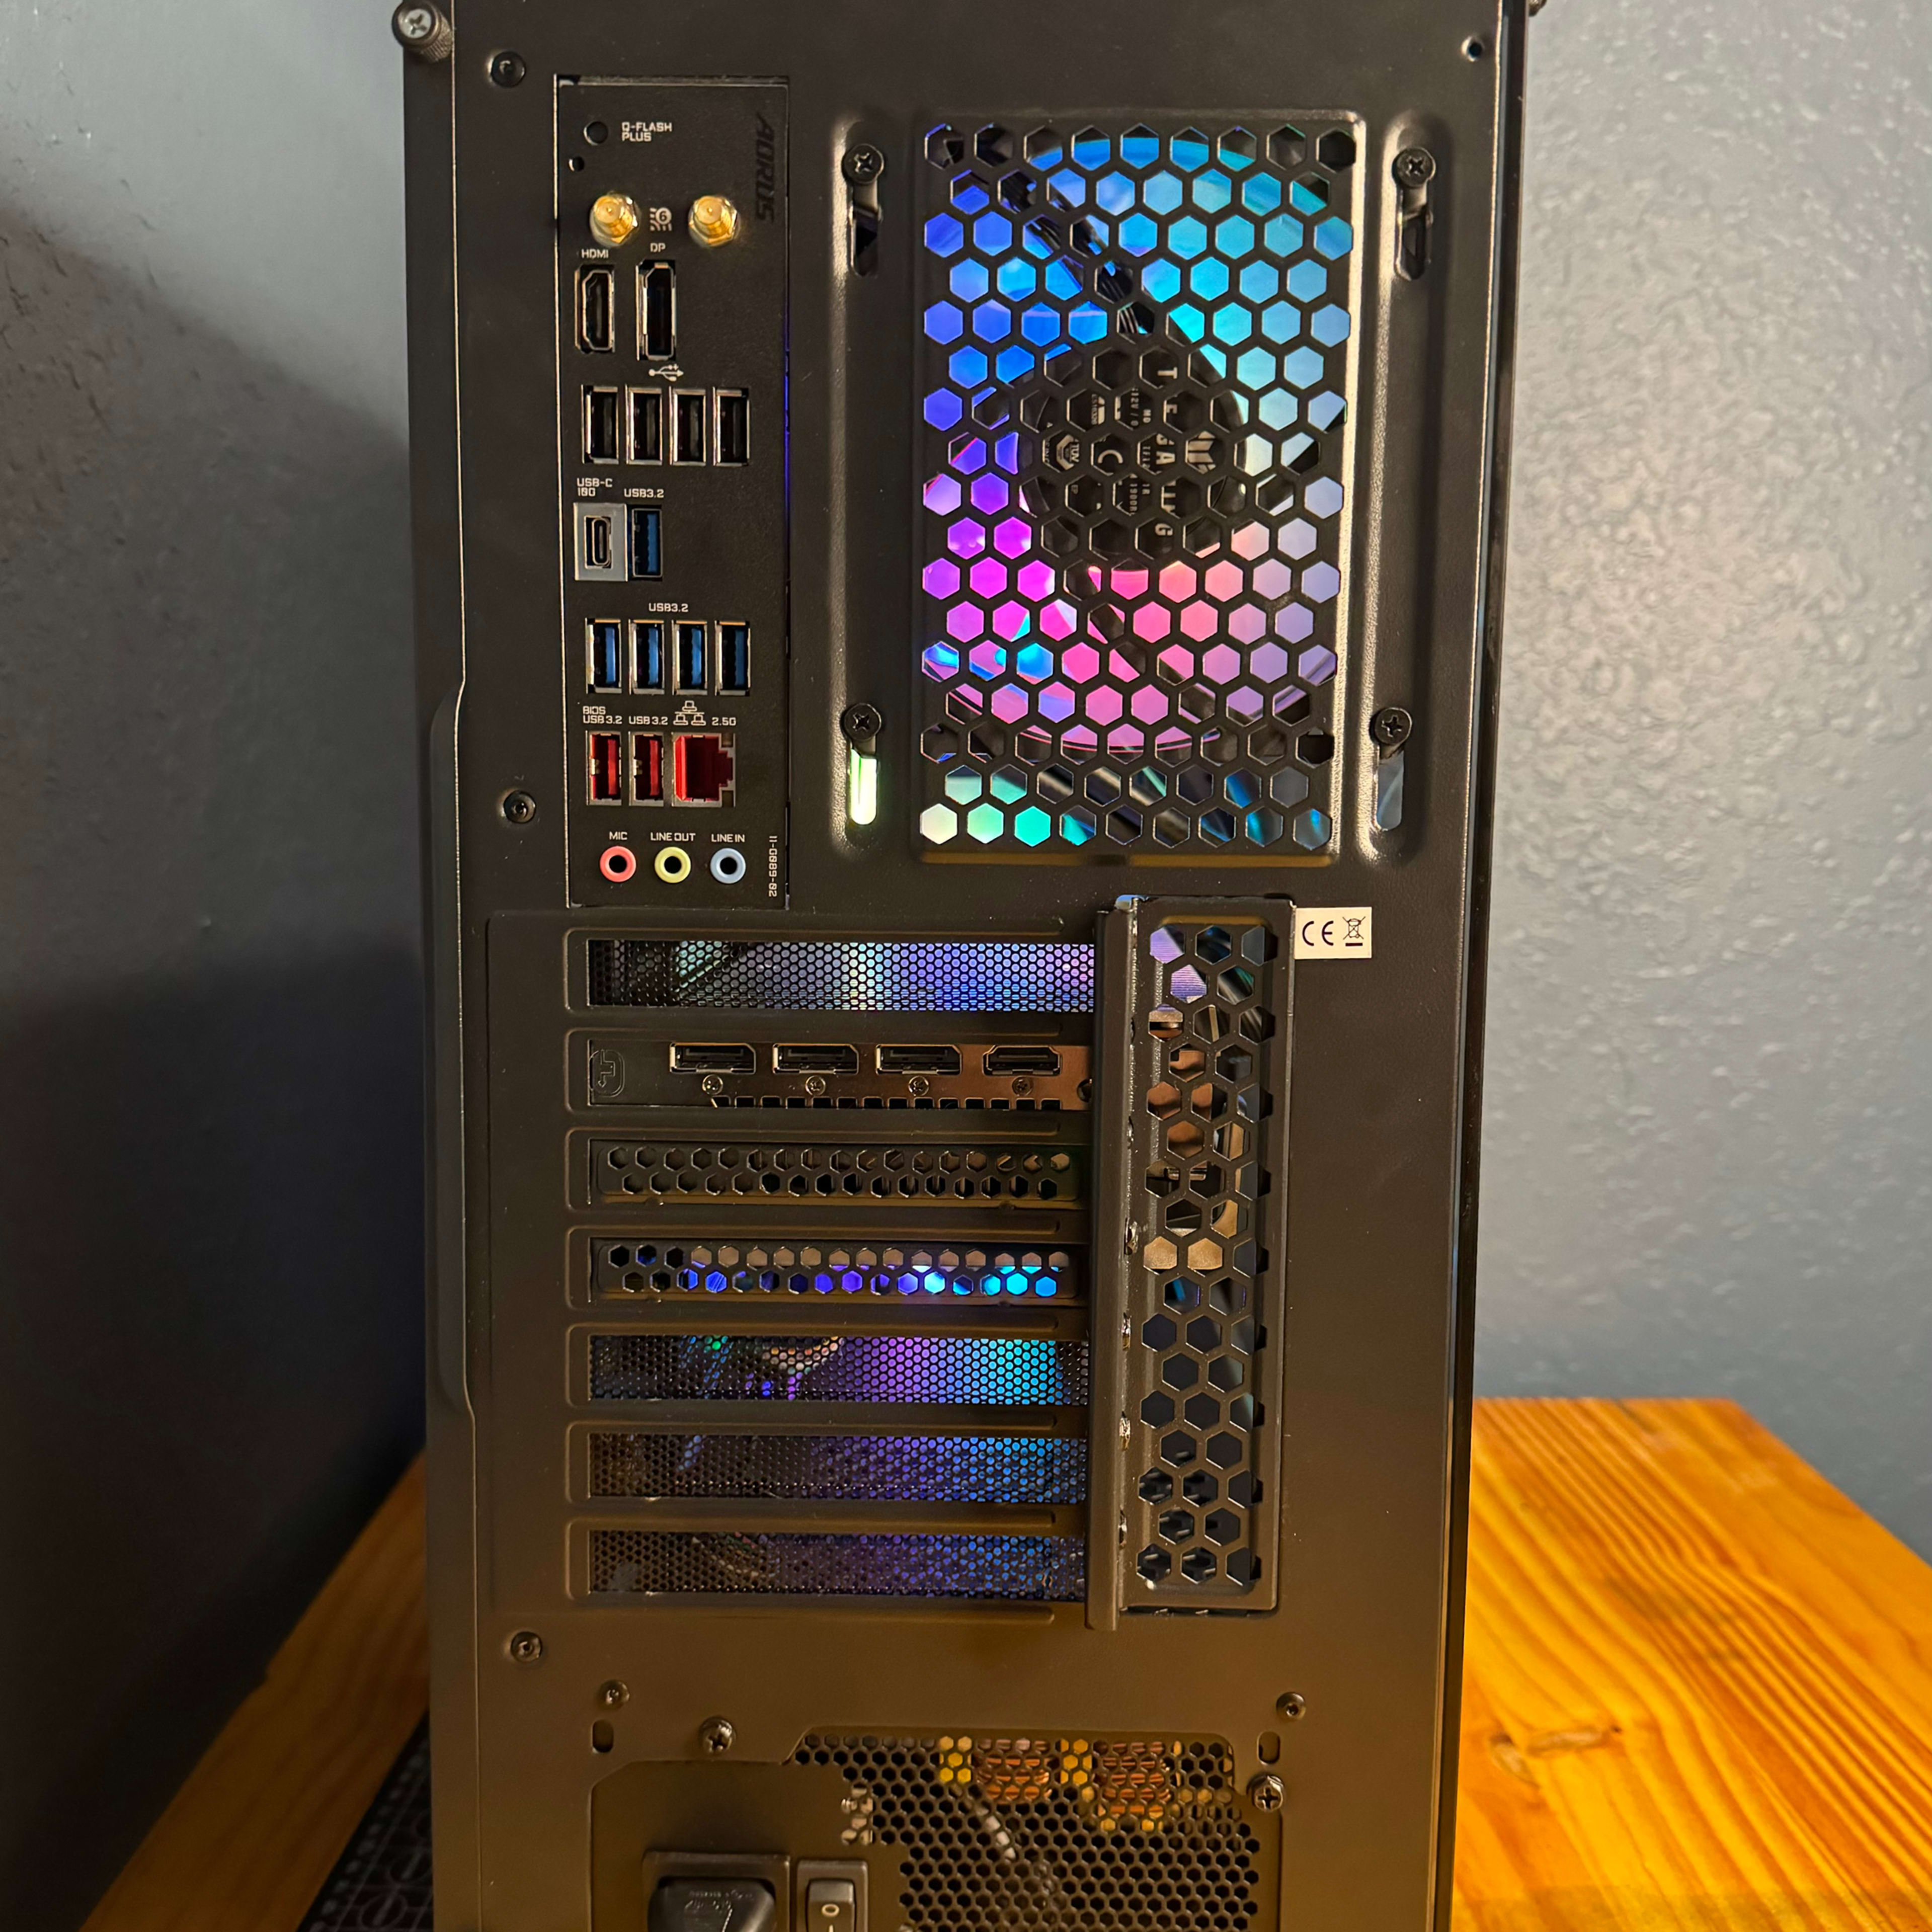 Laser Engraved "Fish Bowl" - 1440p Gaming Beast with 7800X3D CPU and RX 7900XT GPU!